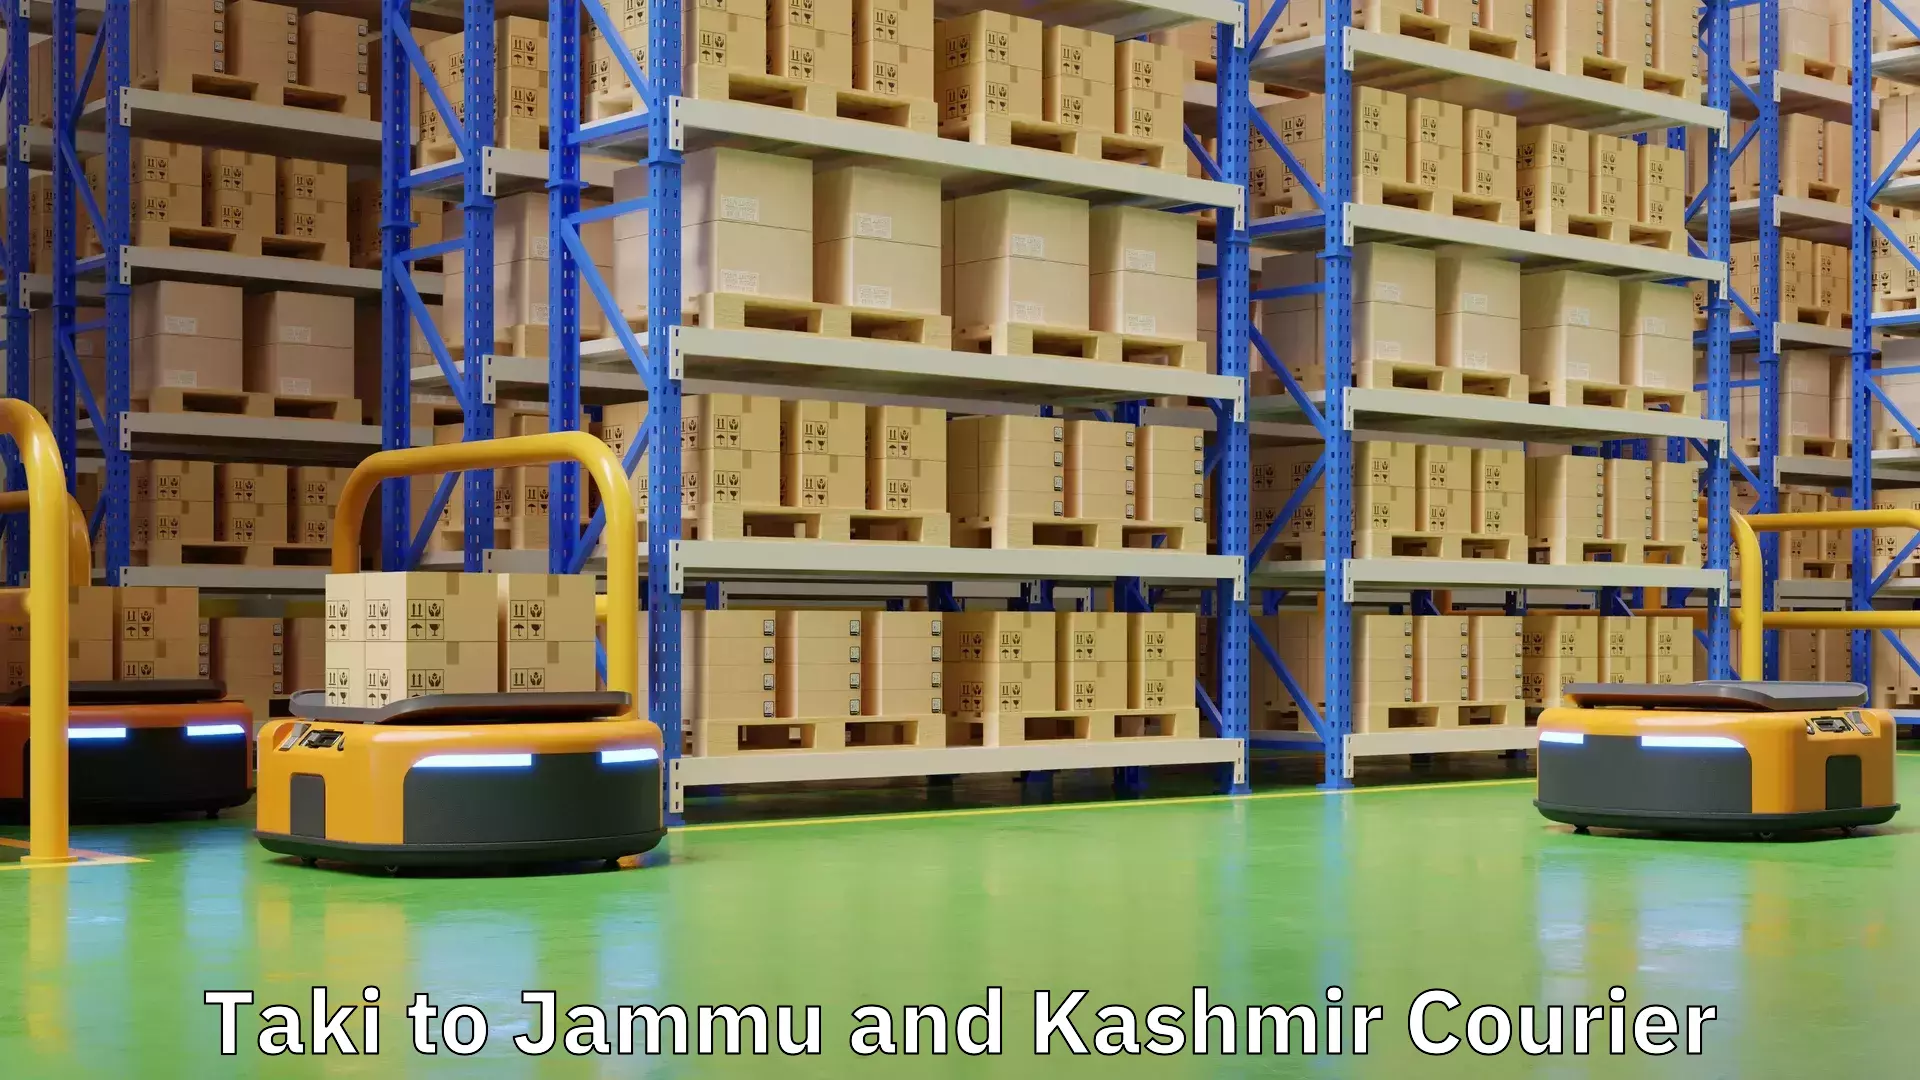 Sustainable shipping practices Taki to Jammu and Kashmir